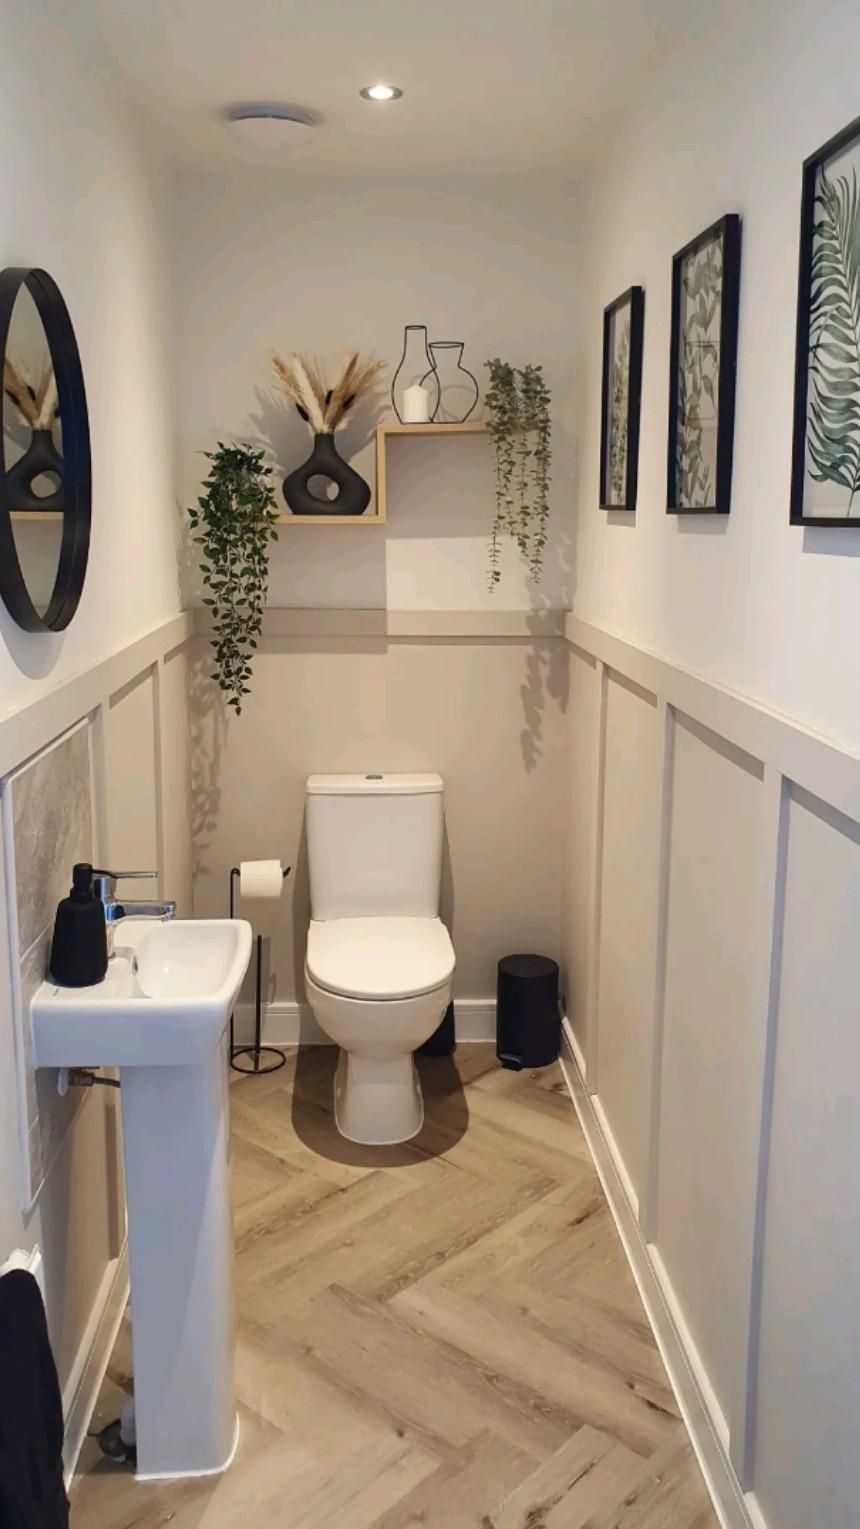 Factors to Remember While Designing a Cloakroom Suite